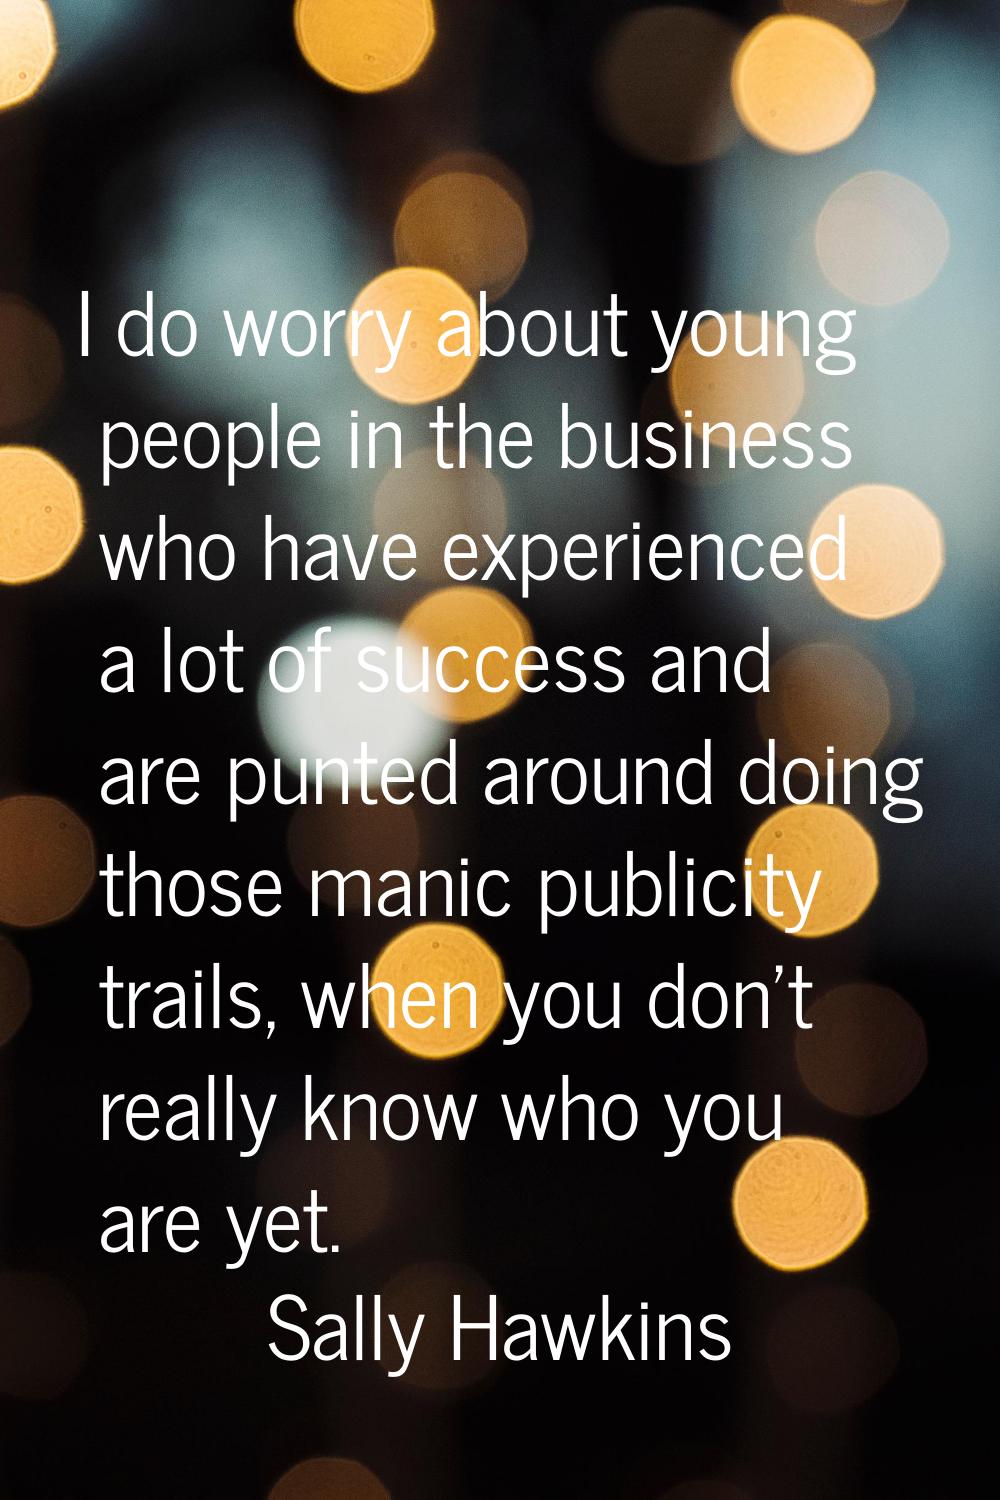 I do worry about young people in the business who have experienced a lot of success and are punted 